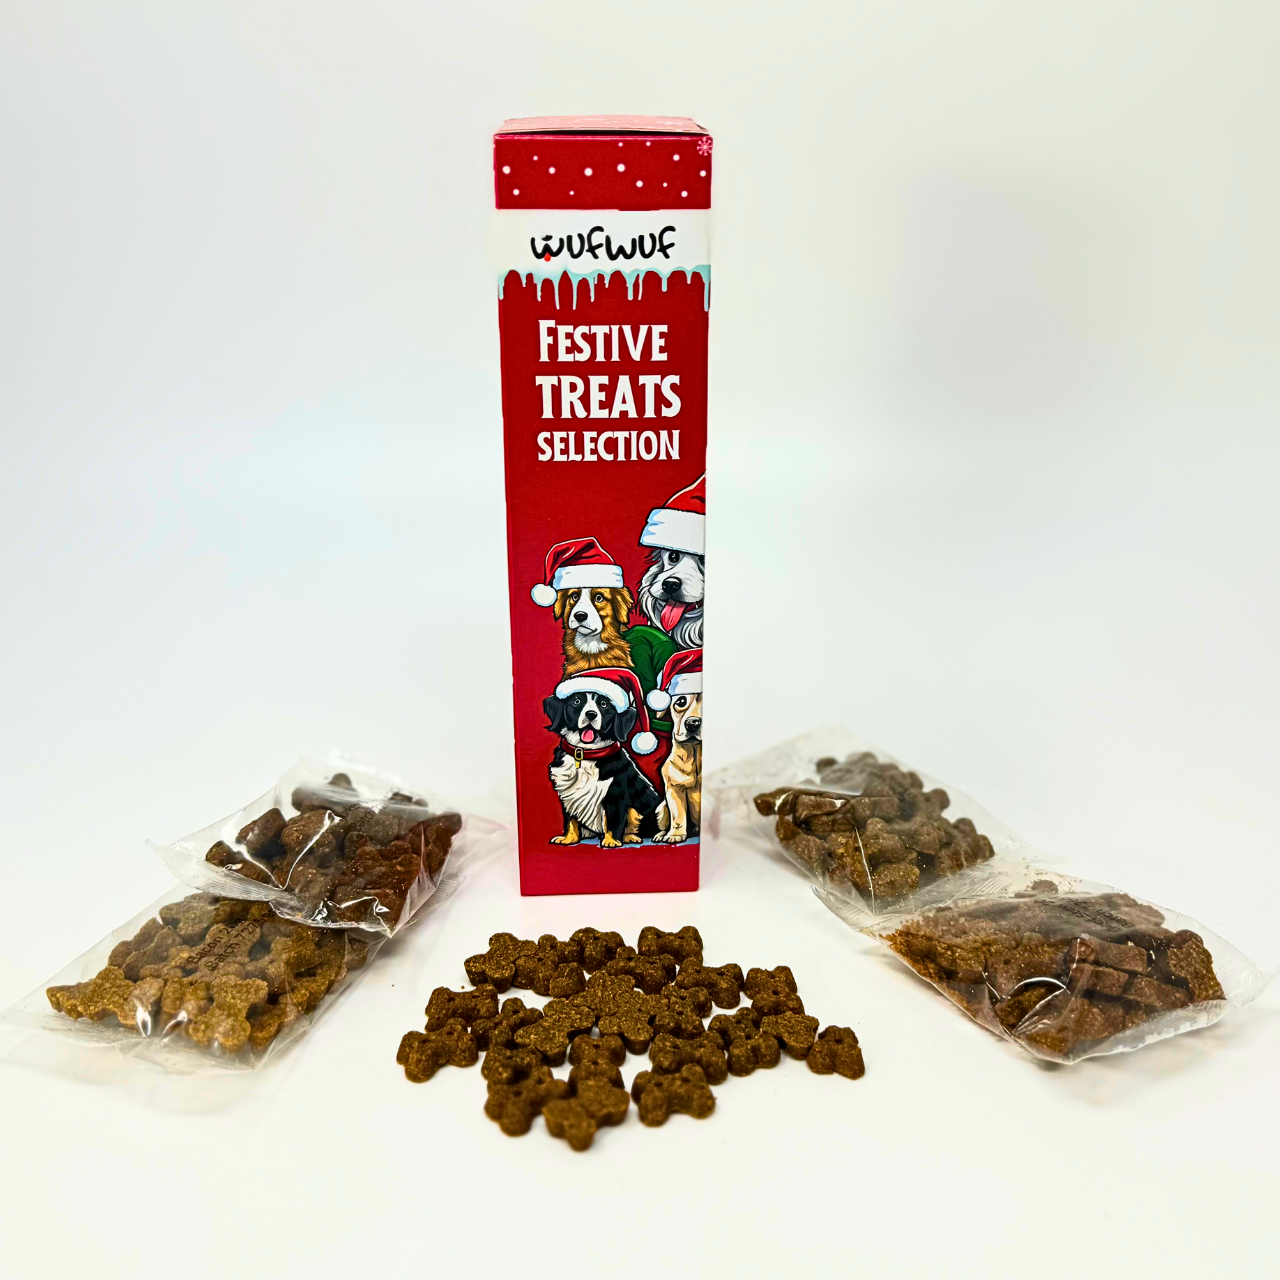 WufWuf Festive Treat Selection, Limited Edition with Turkey, Bacon, Beef, and Chicken Delights! x 10 Pack